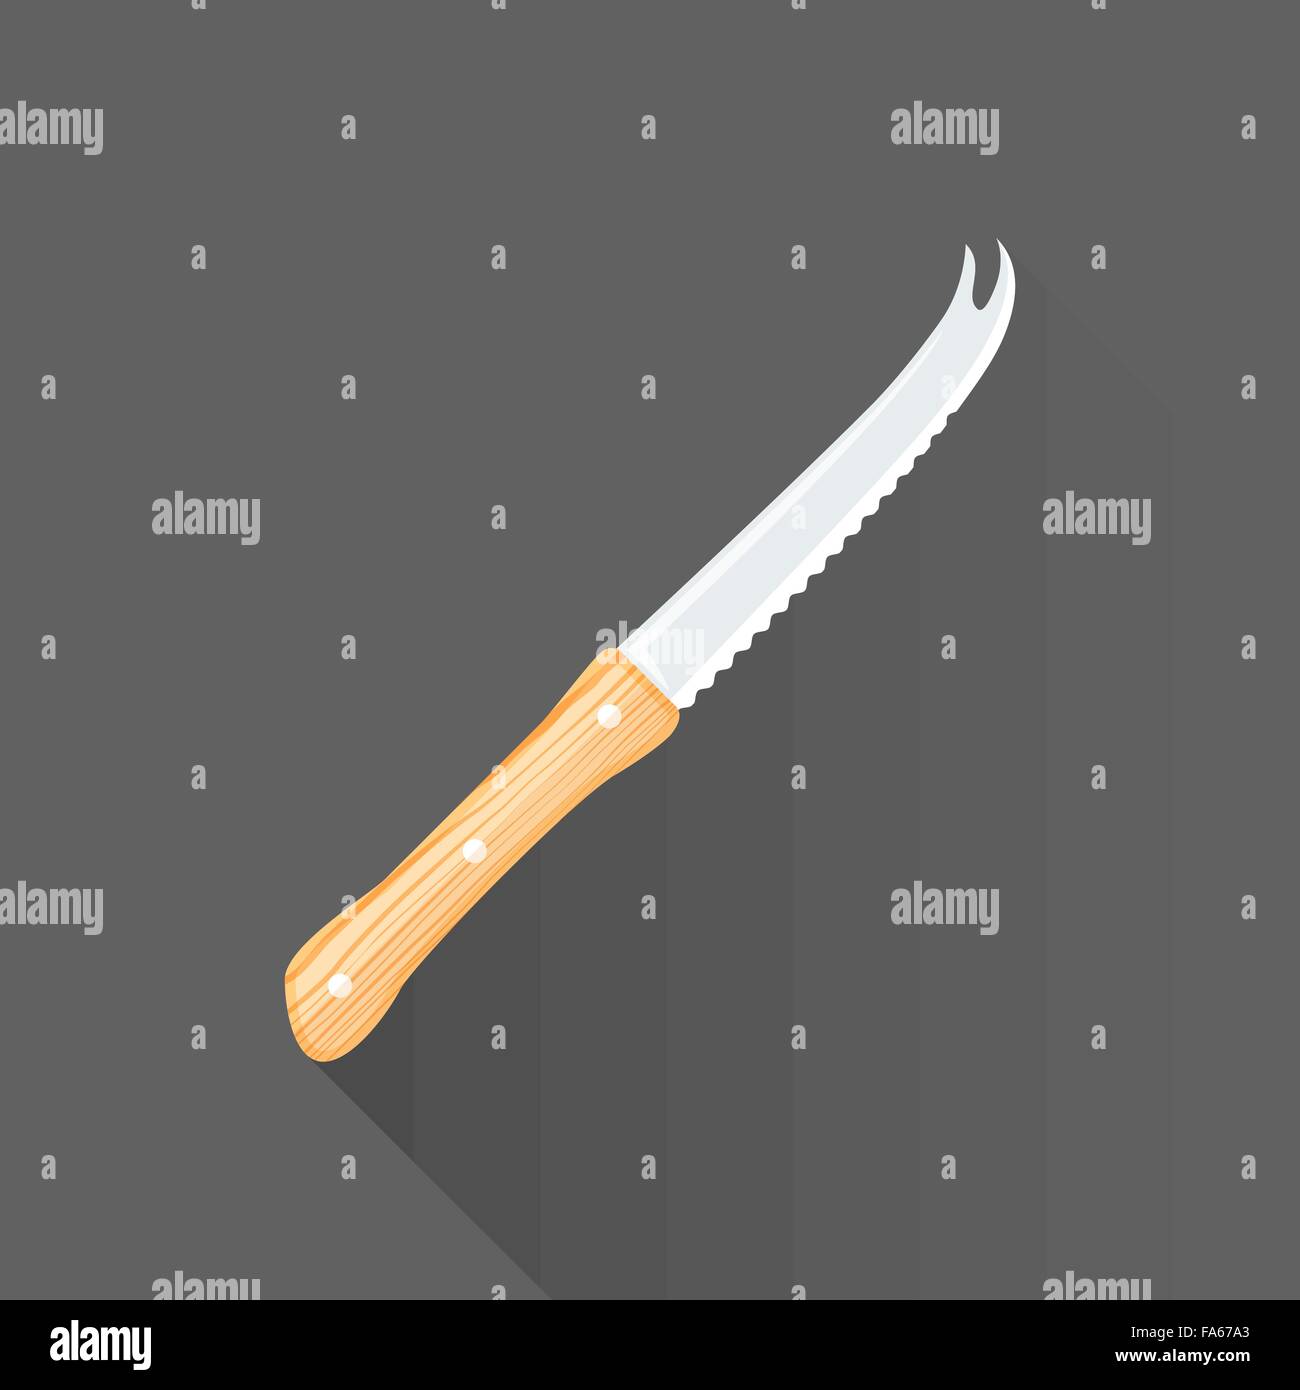 vector colored flat design bar knife wood handle forked blade tip isolated illustration gray background long shadow Stock Vector